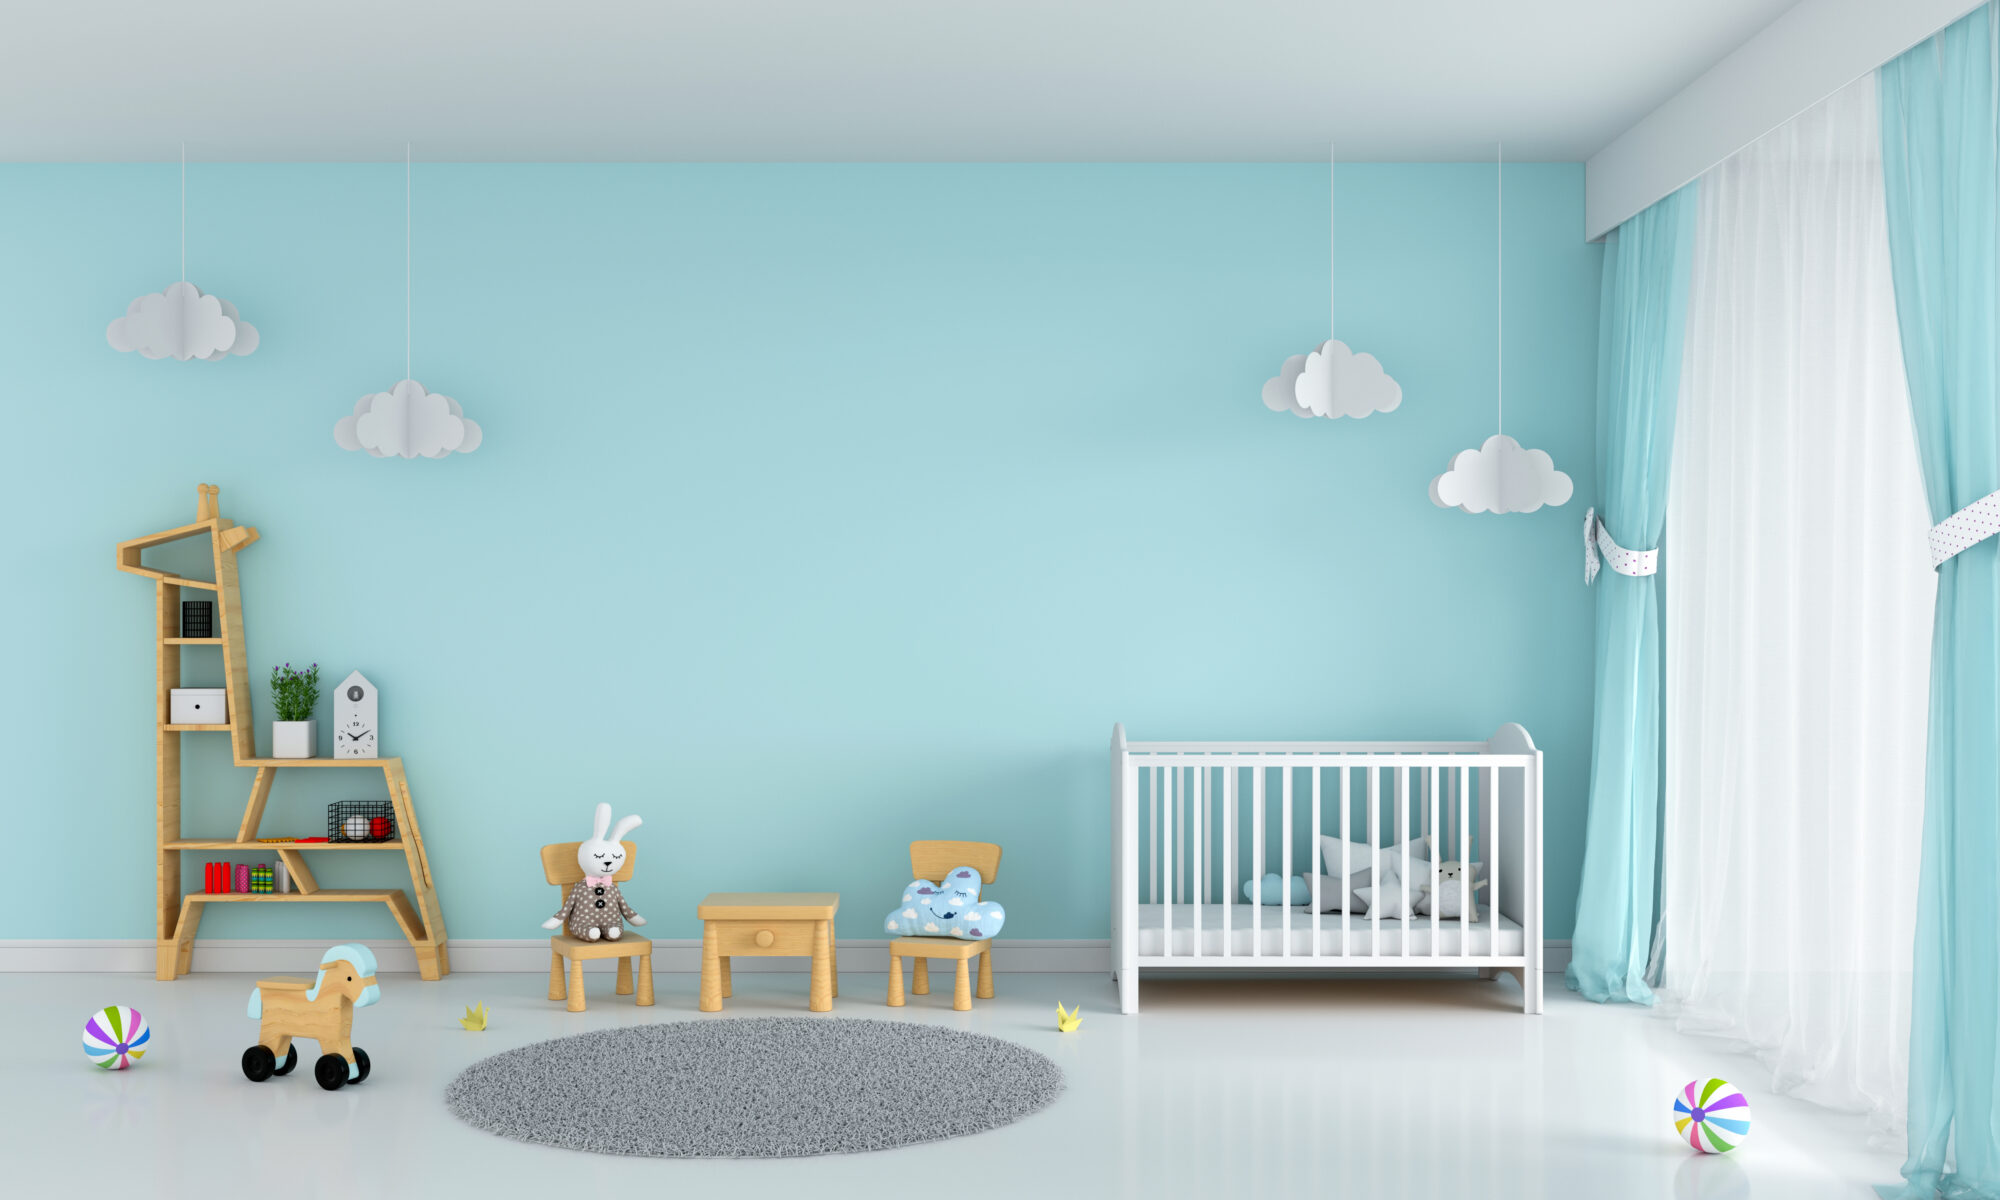 7 Tips for Preparing Your Home for Baby